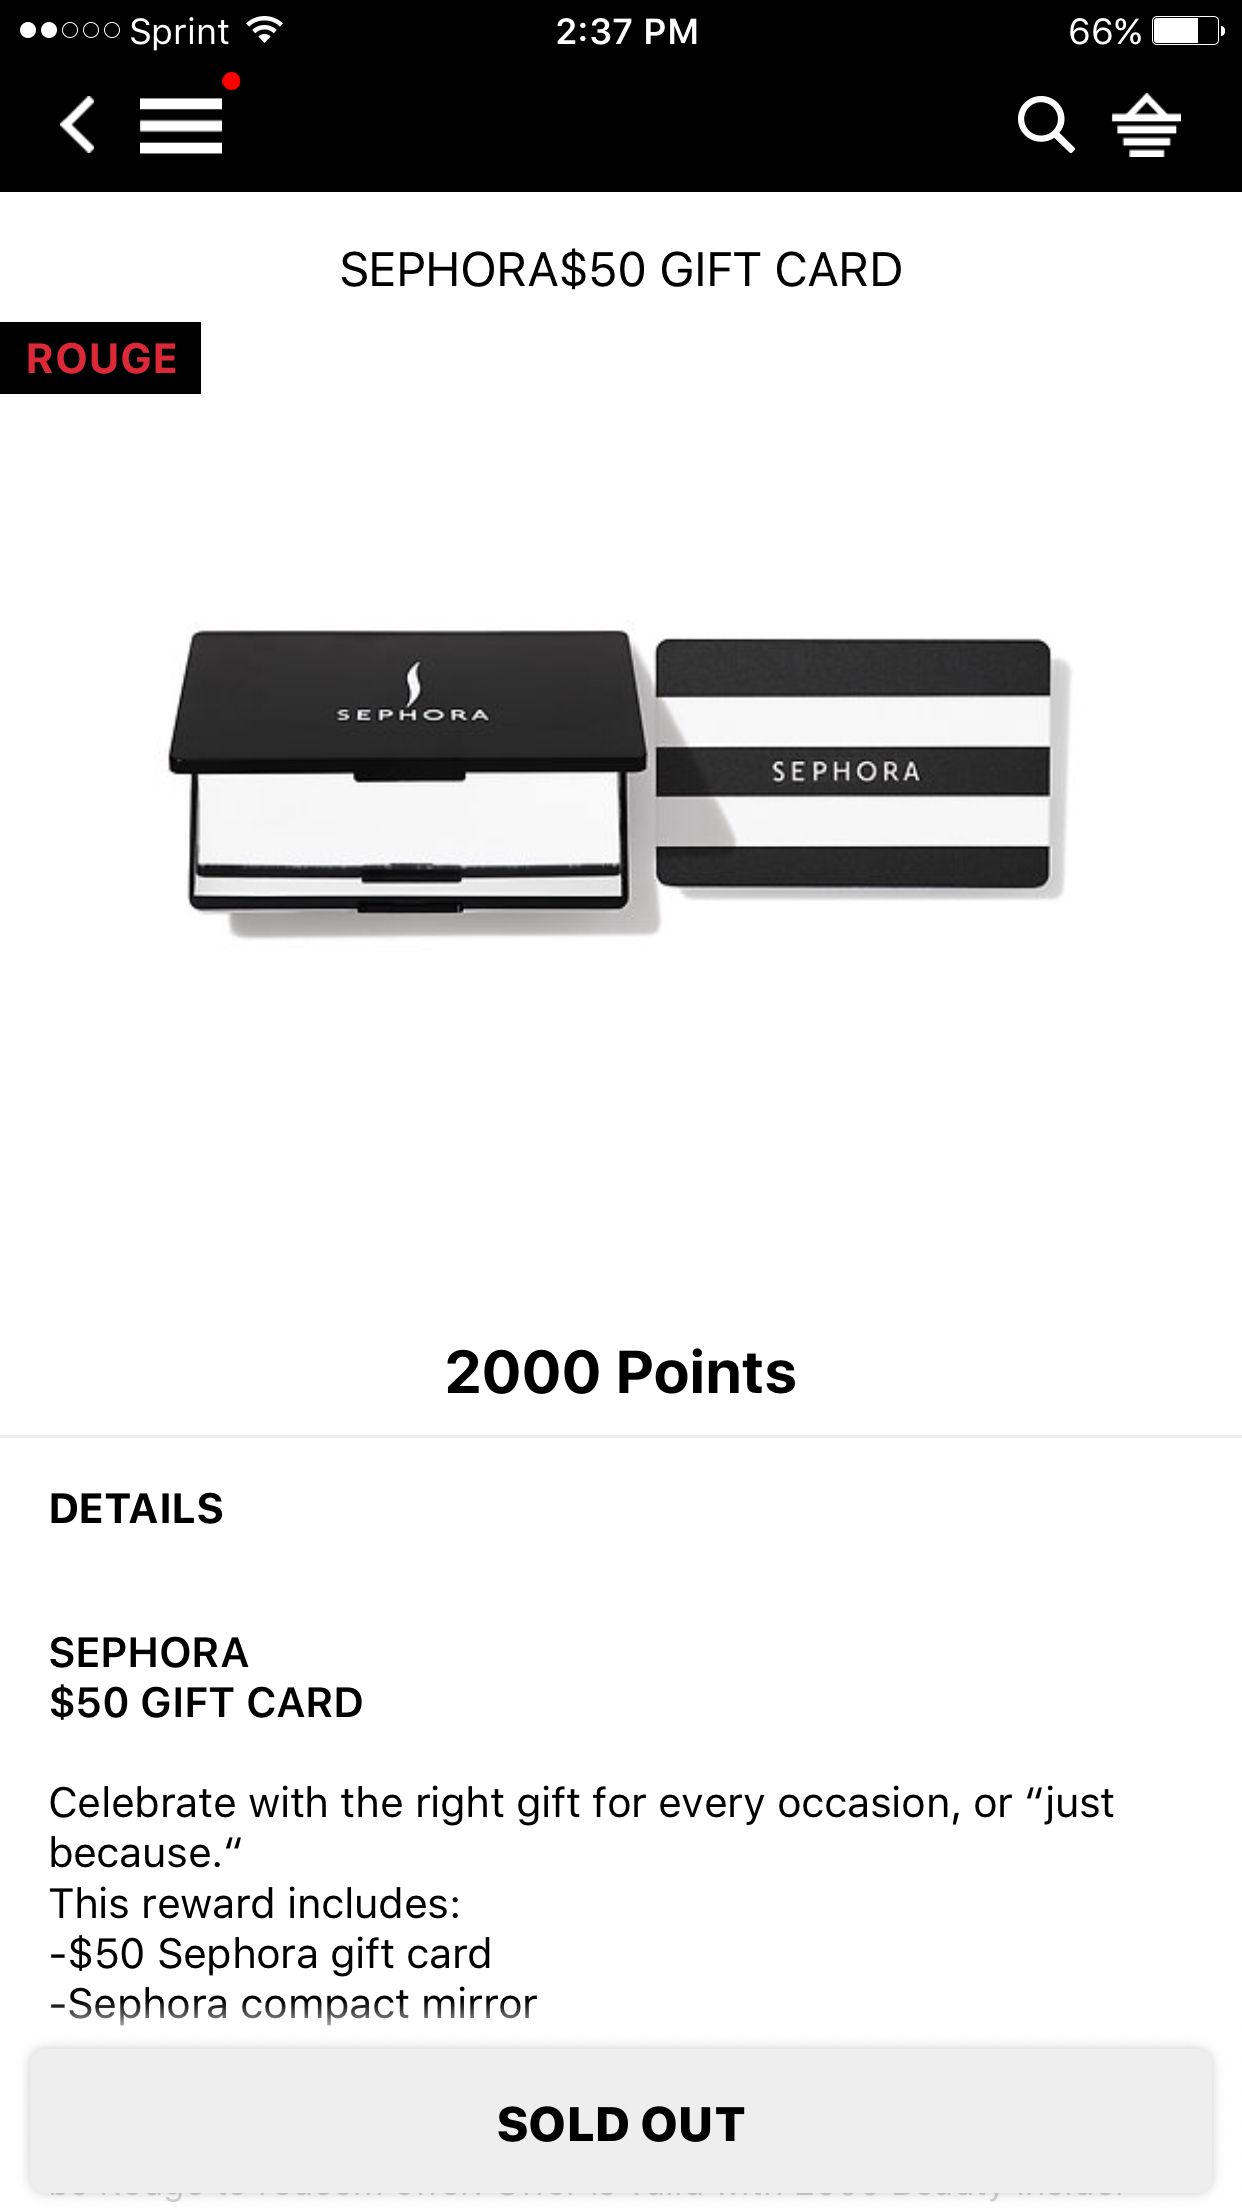 How to Get Sephora Gift Card With Points  